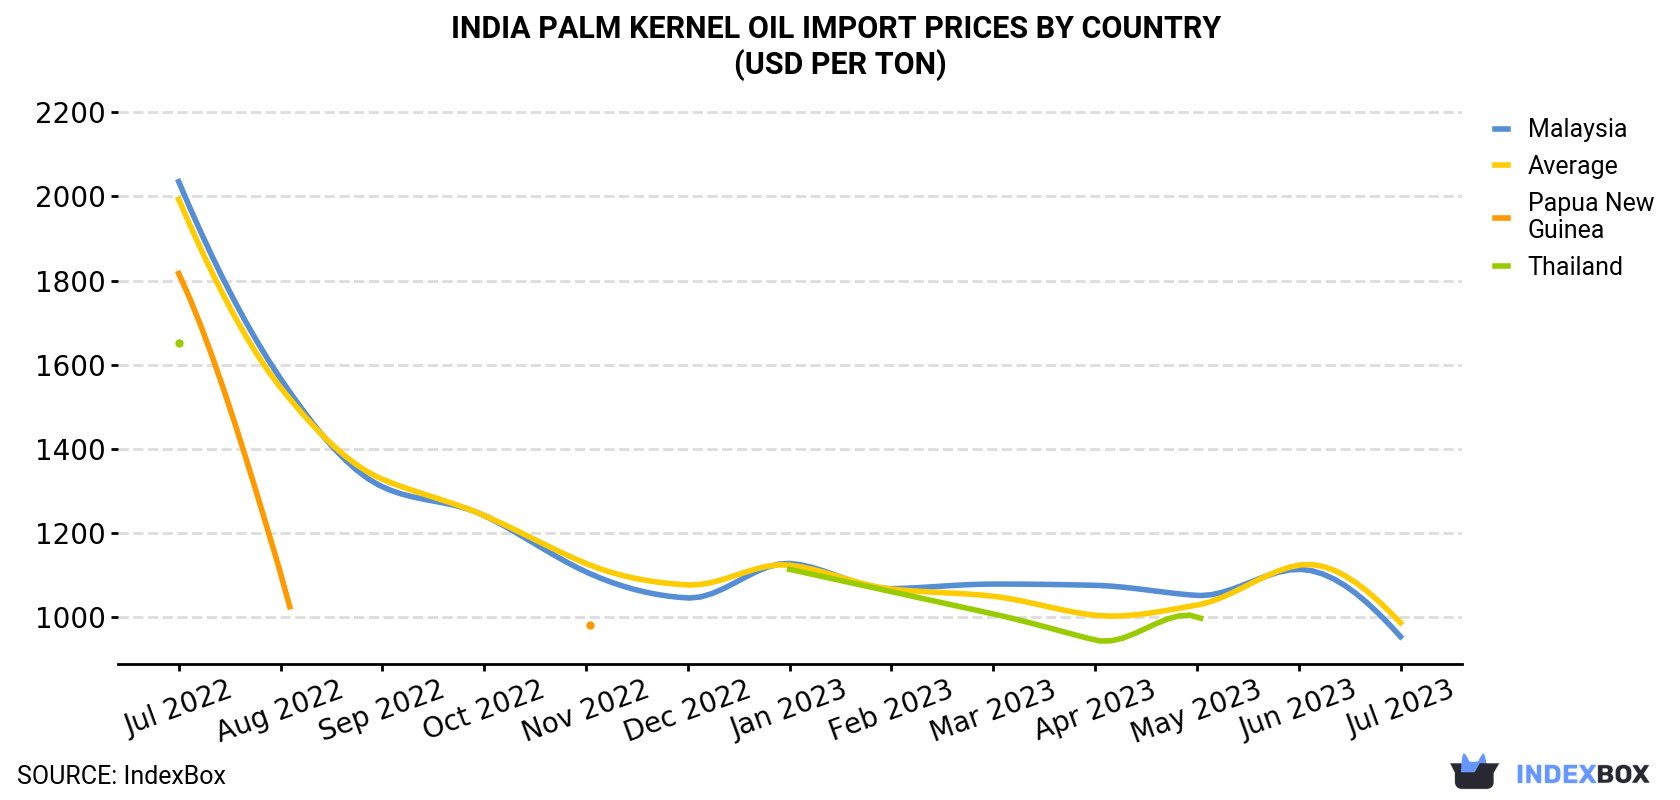 India Palm Kernel Oil Import Prices By Country (USD Per Ton)